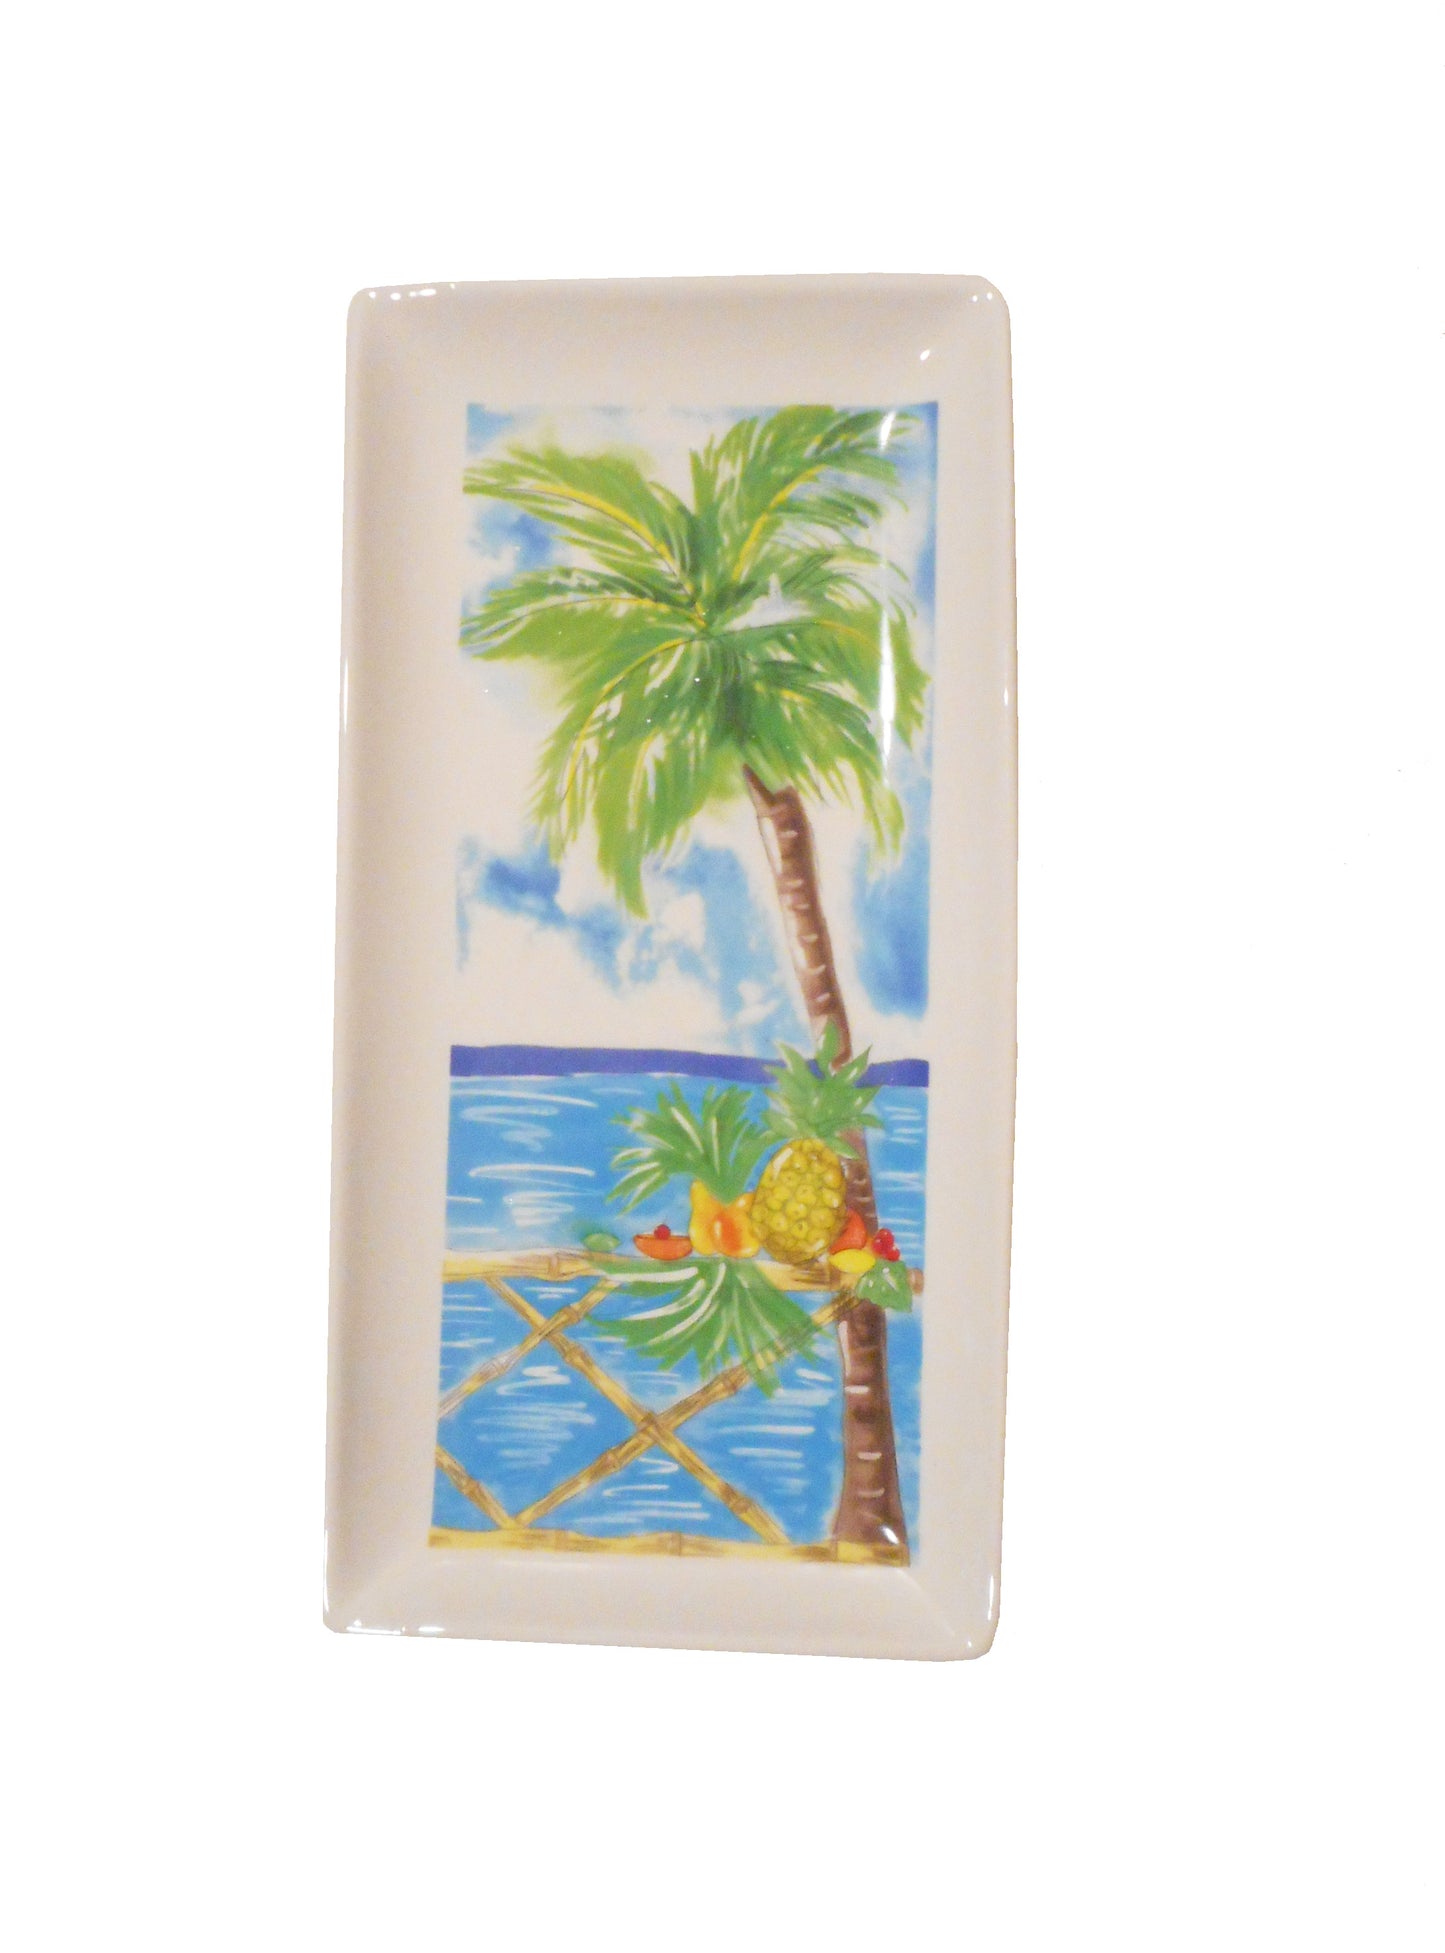 14 x 7 Ceramic Tray features an ocean view with a palm tree in the foreground and a table with tropical fruit.